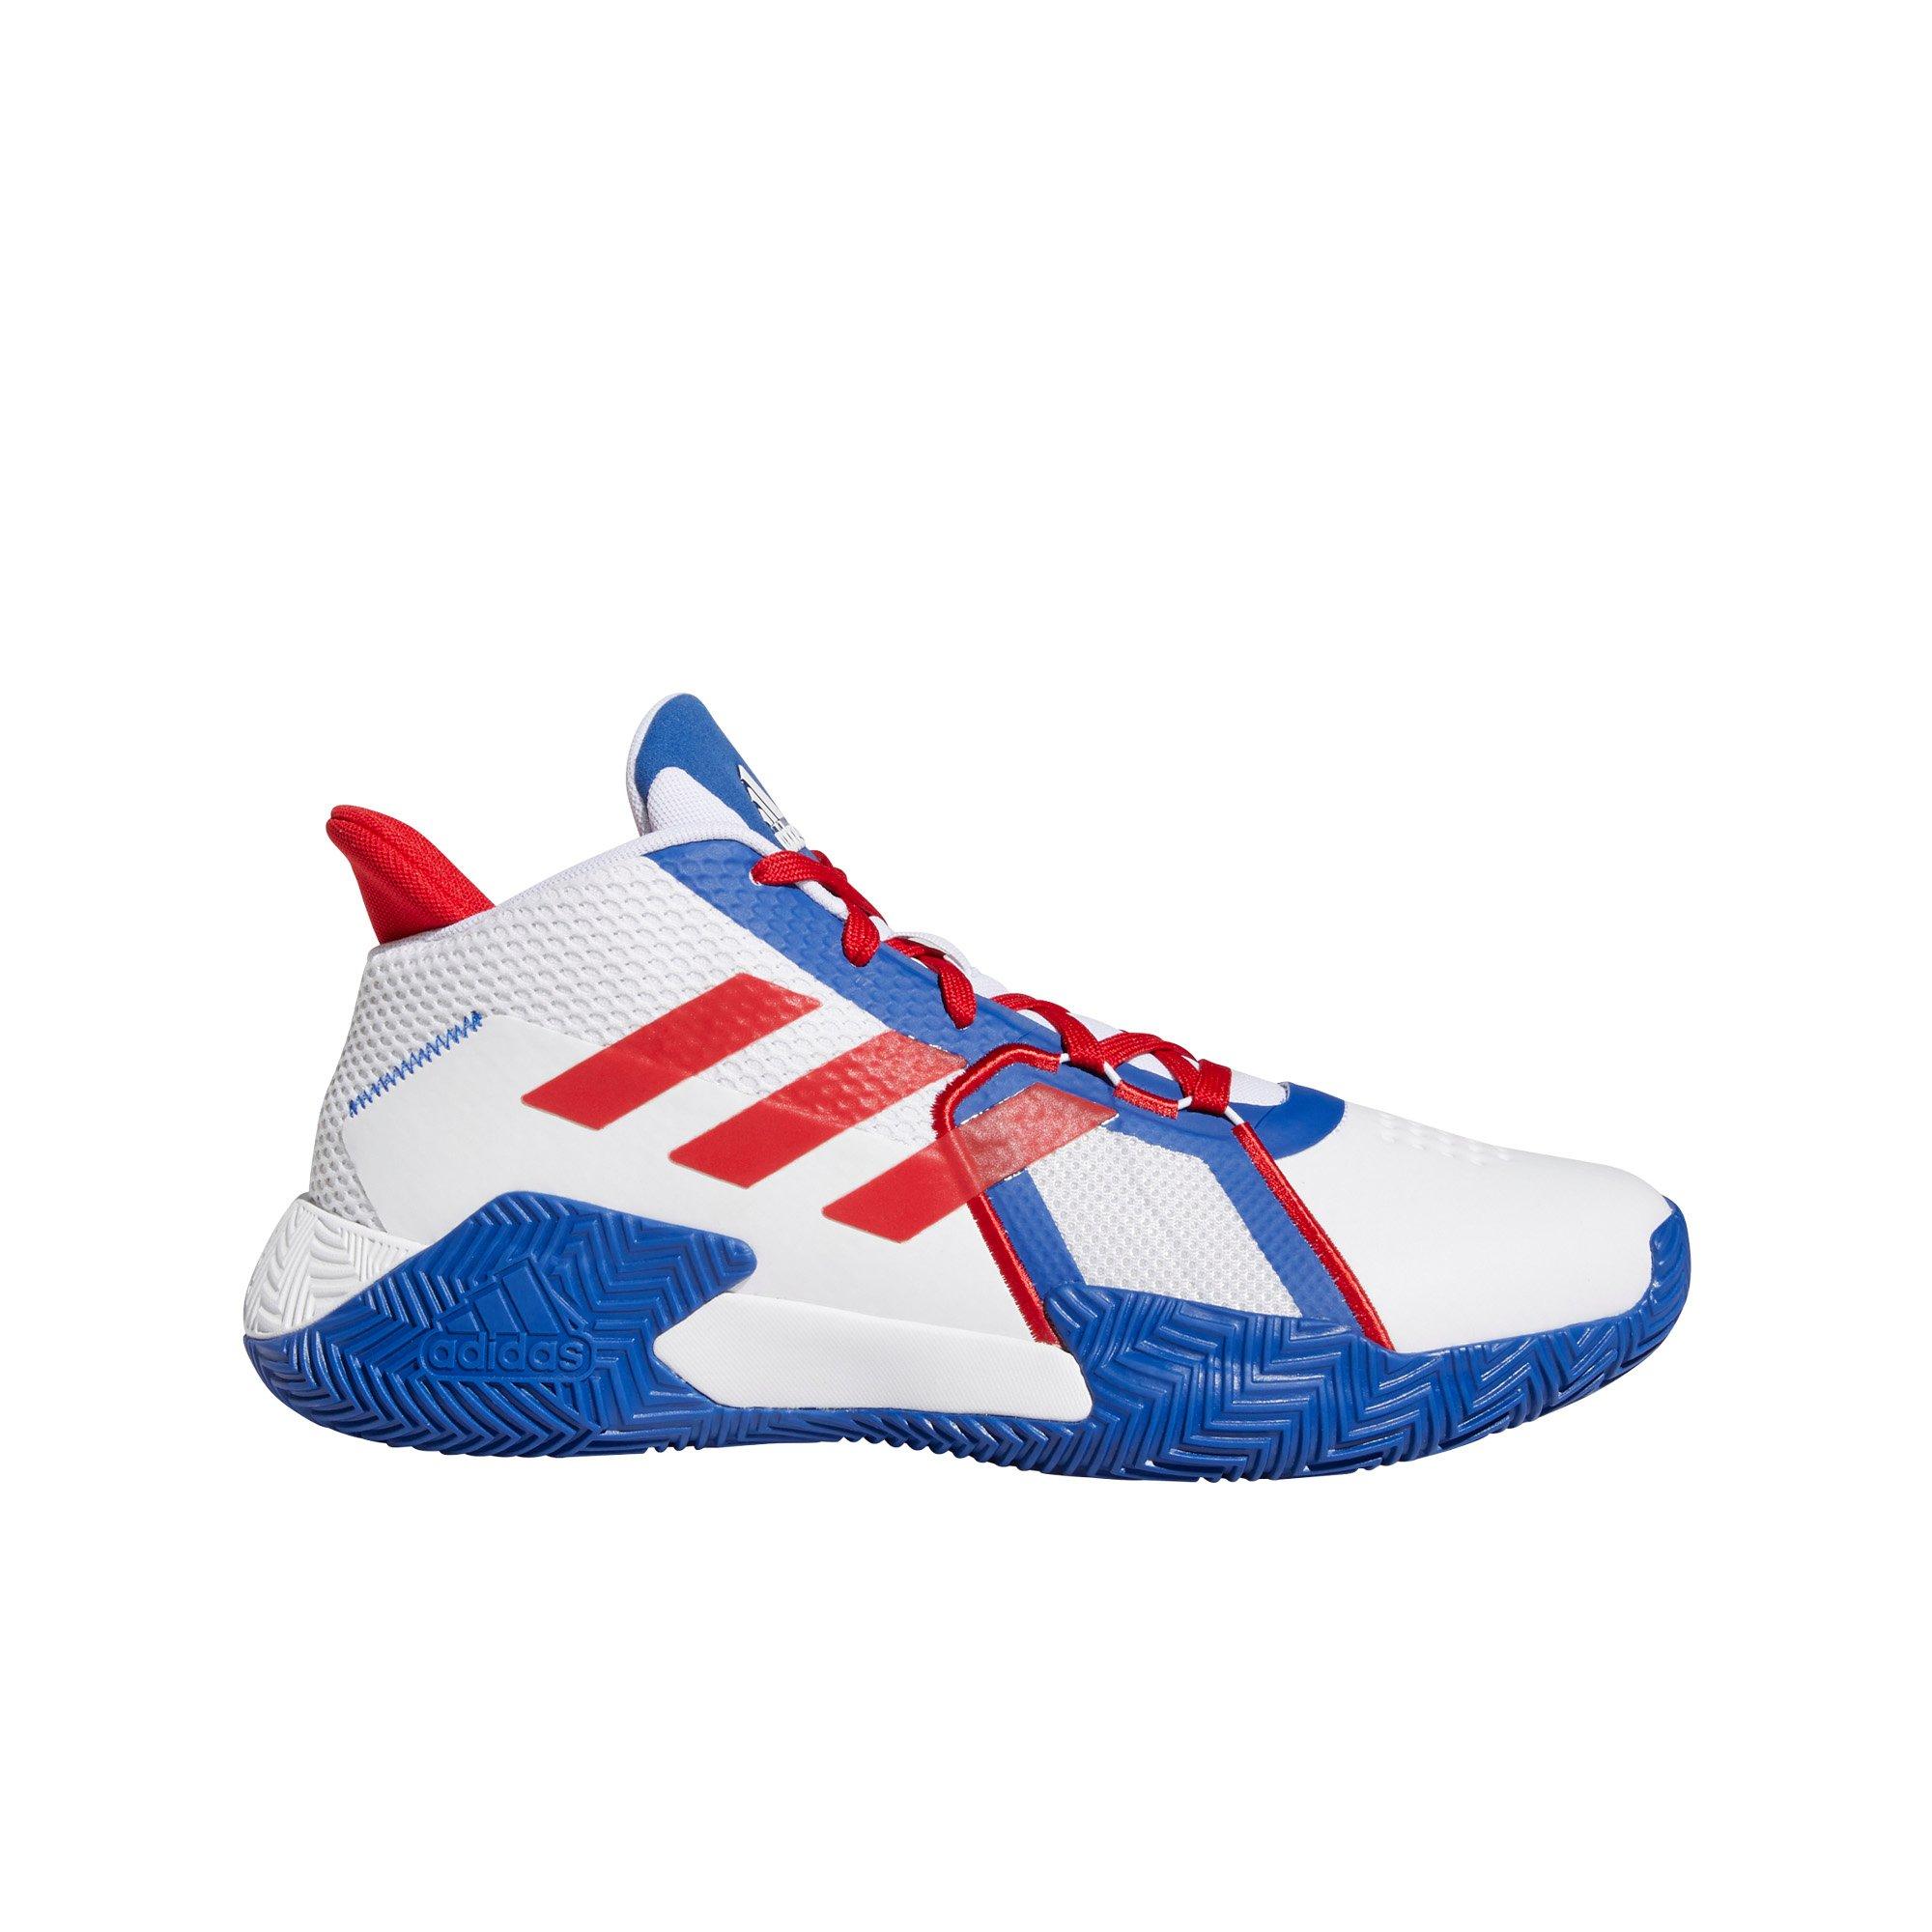 adidas blue white red shoes